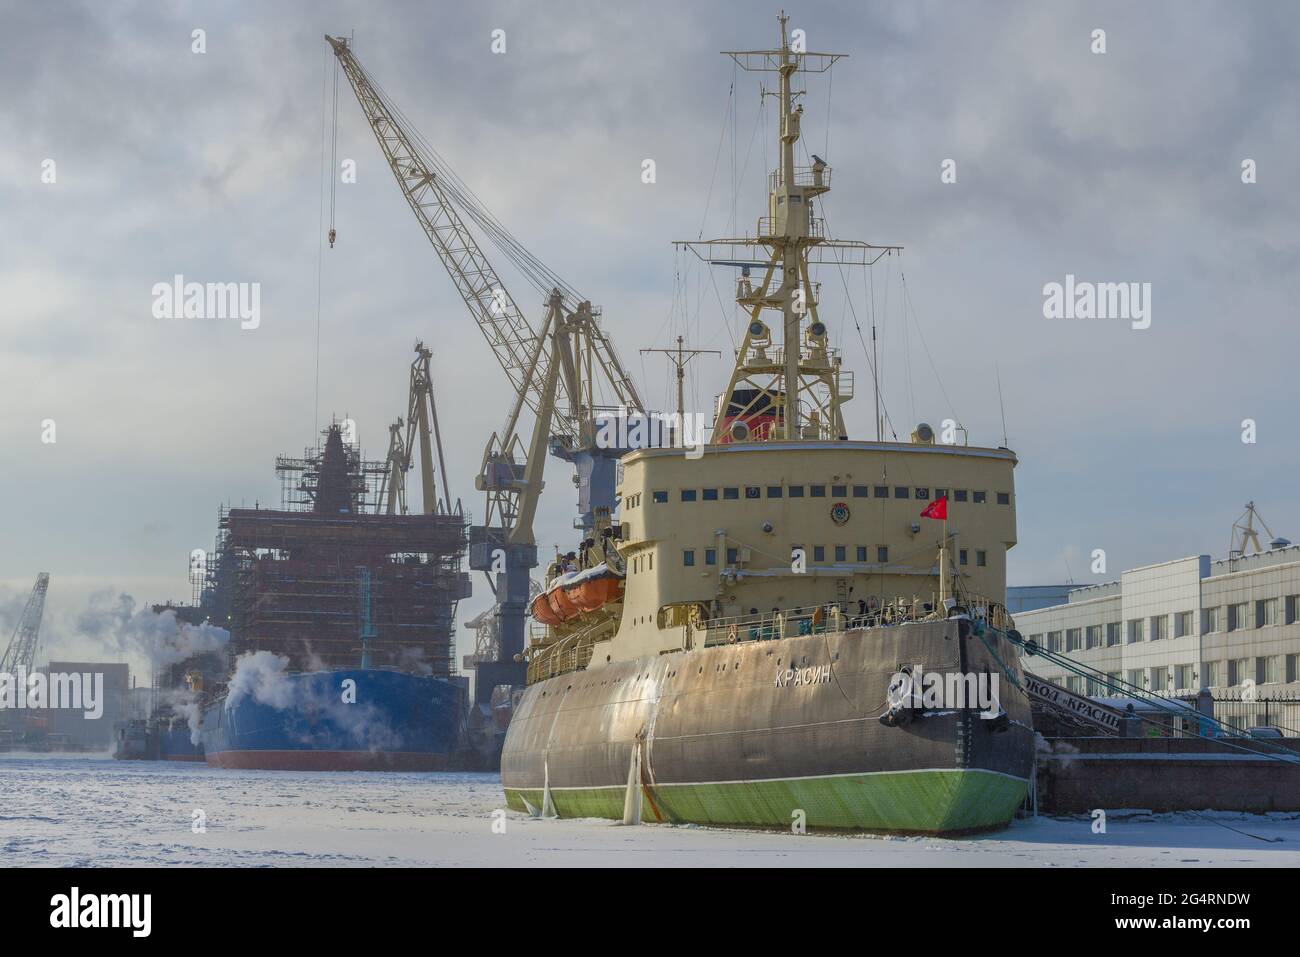 ST. PETERSBURG, RUSSIA - FEBRUARY 15, 2021: The old icebreaker Krasin against the backdrop of the Baltic Shipyard on a frosty February day Stock Photo